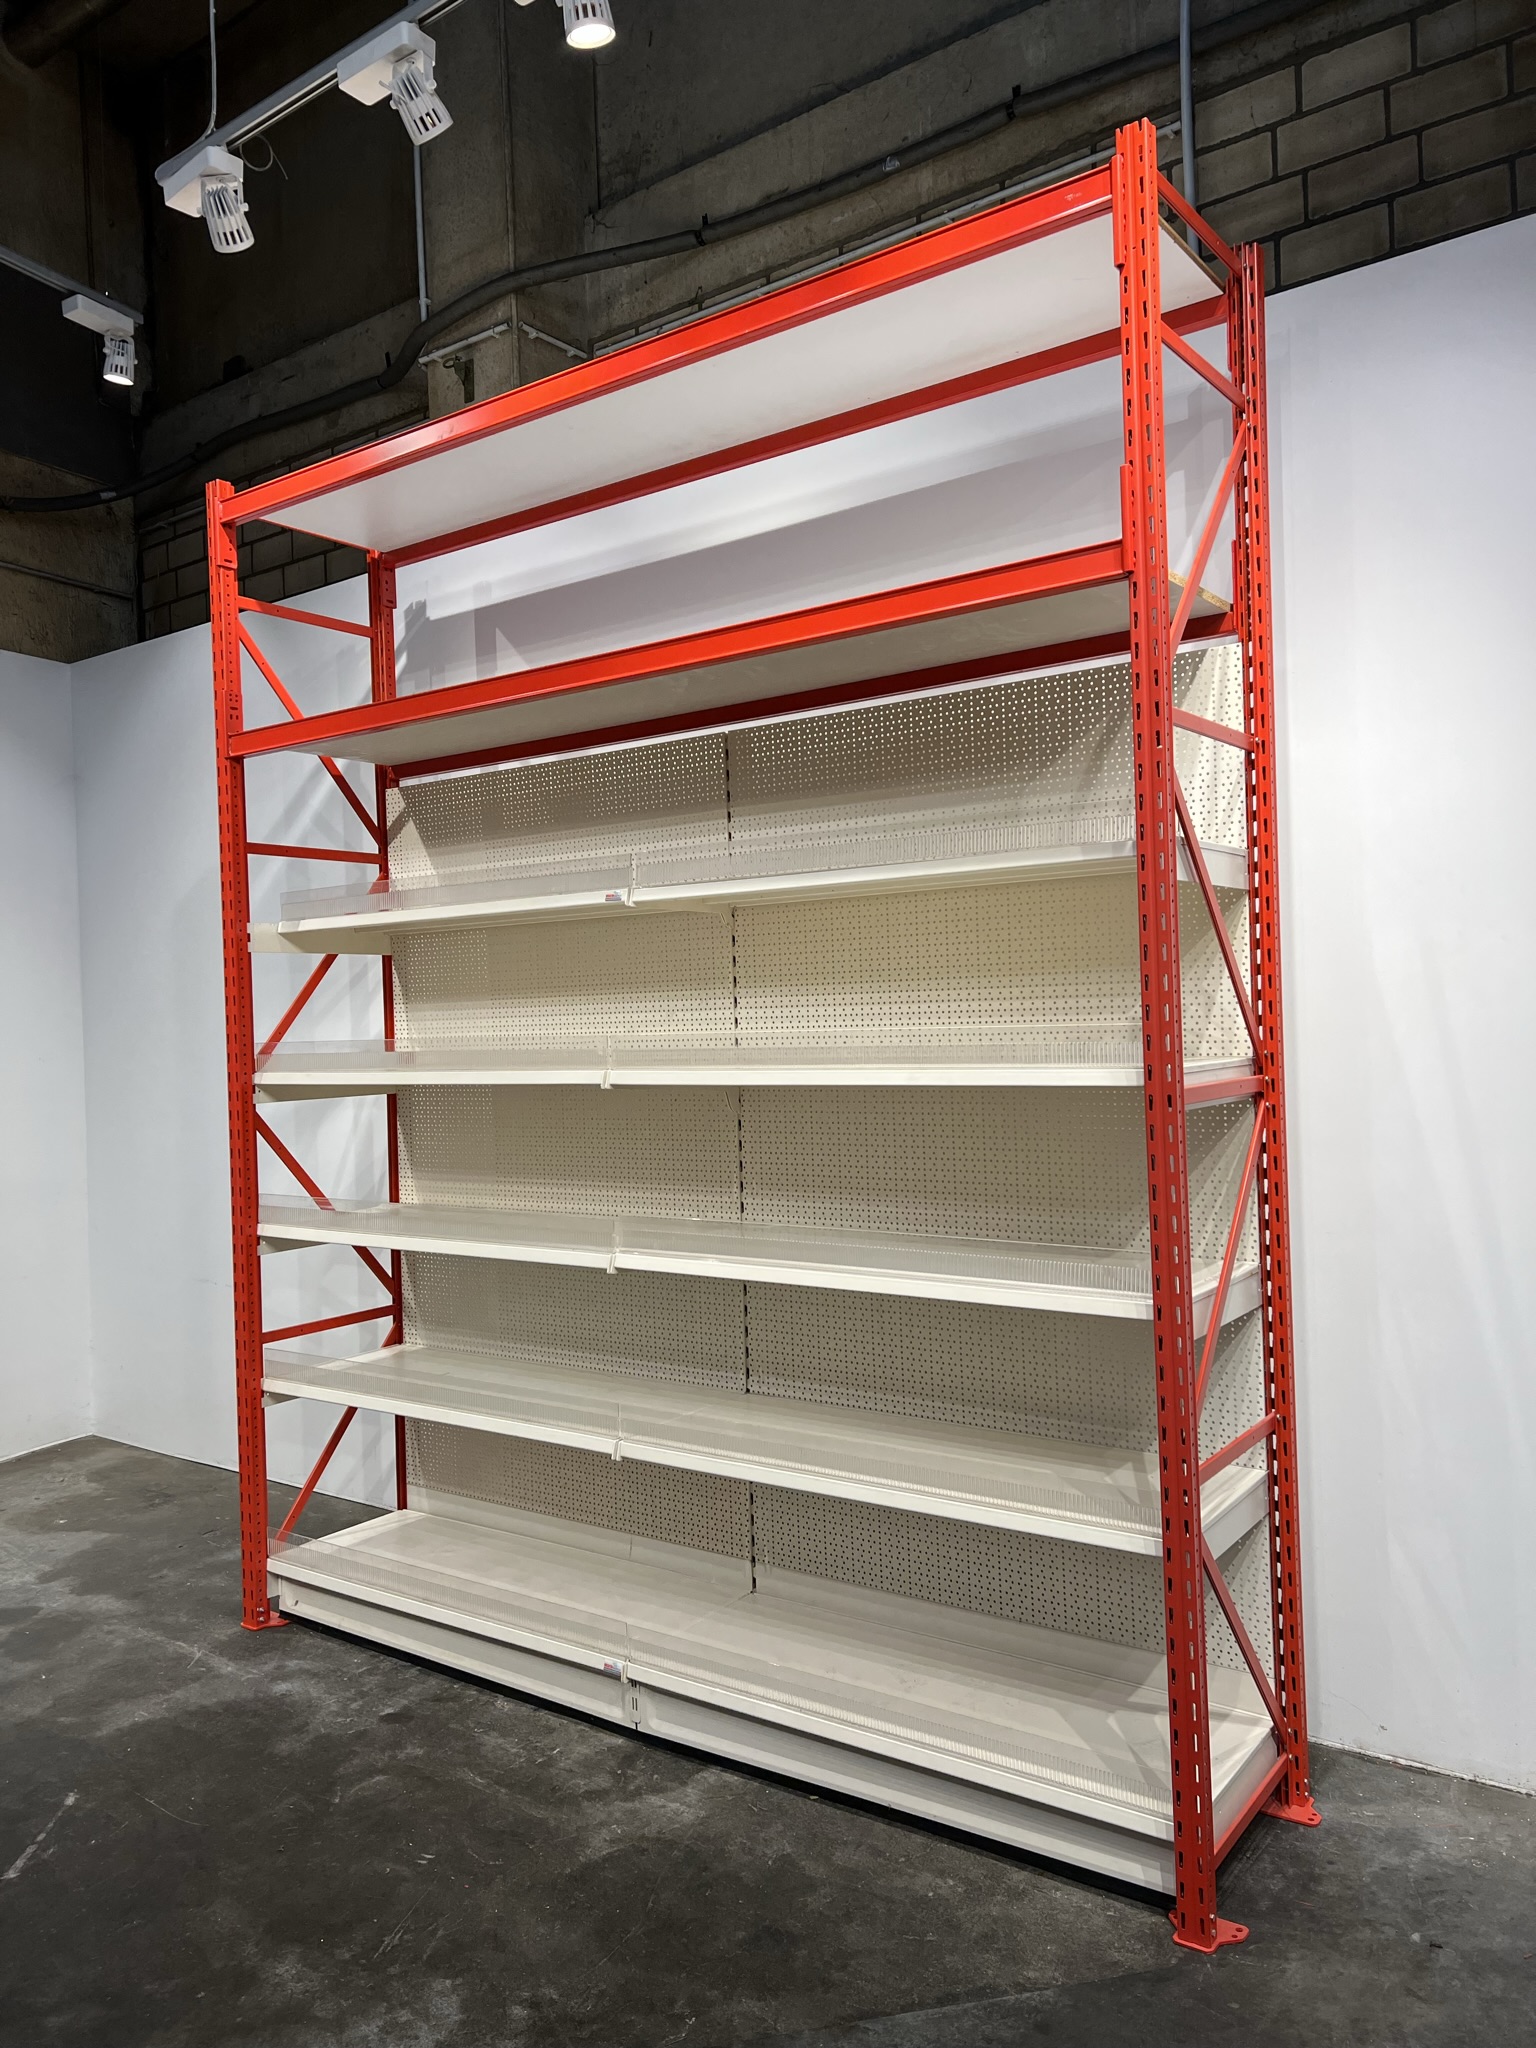 Shelving system / wholesale market  shelving / light heavy duty shelf, Tego, suitable for appropx. 547 m²  of sales area